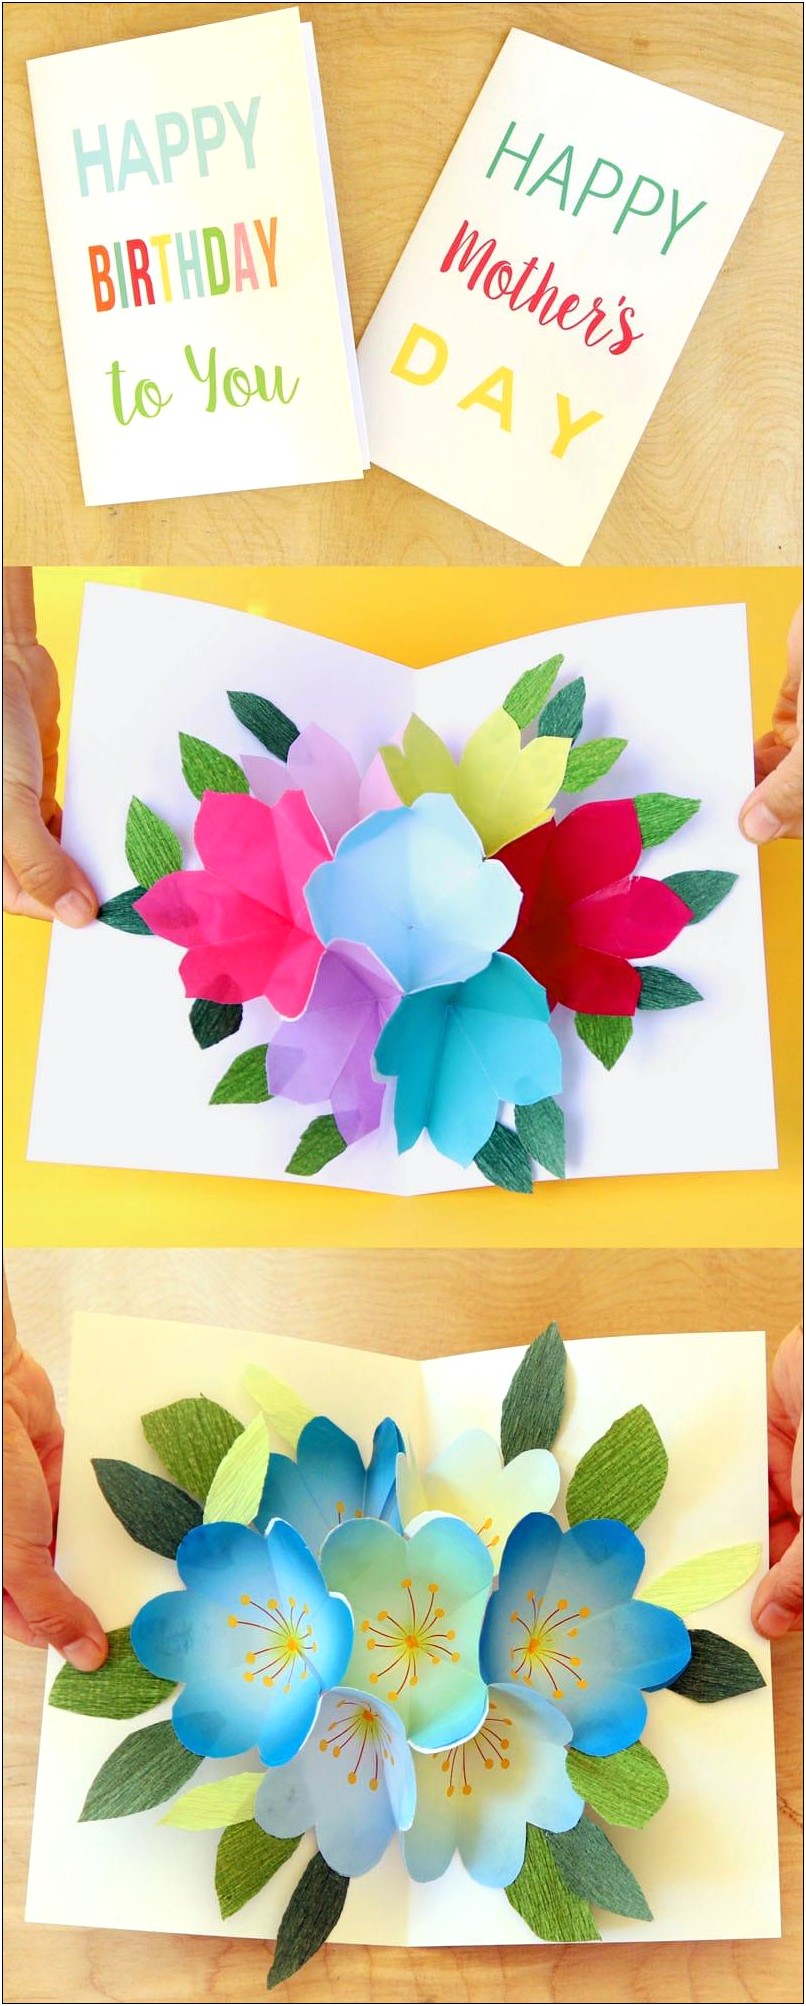 Free Birthday Greeting Card Template For 3379